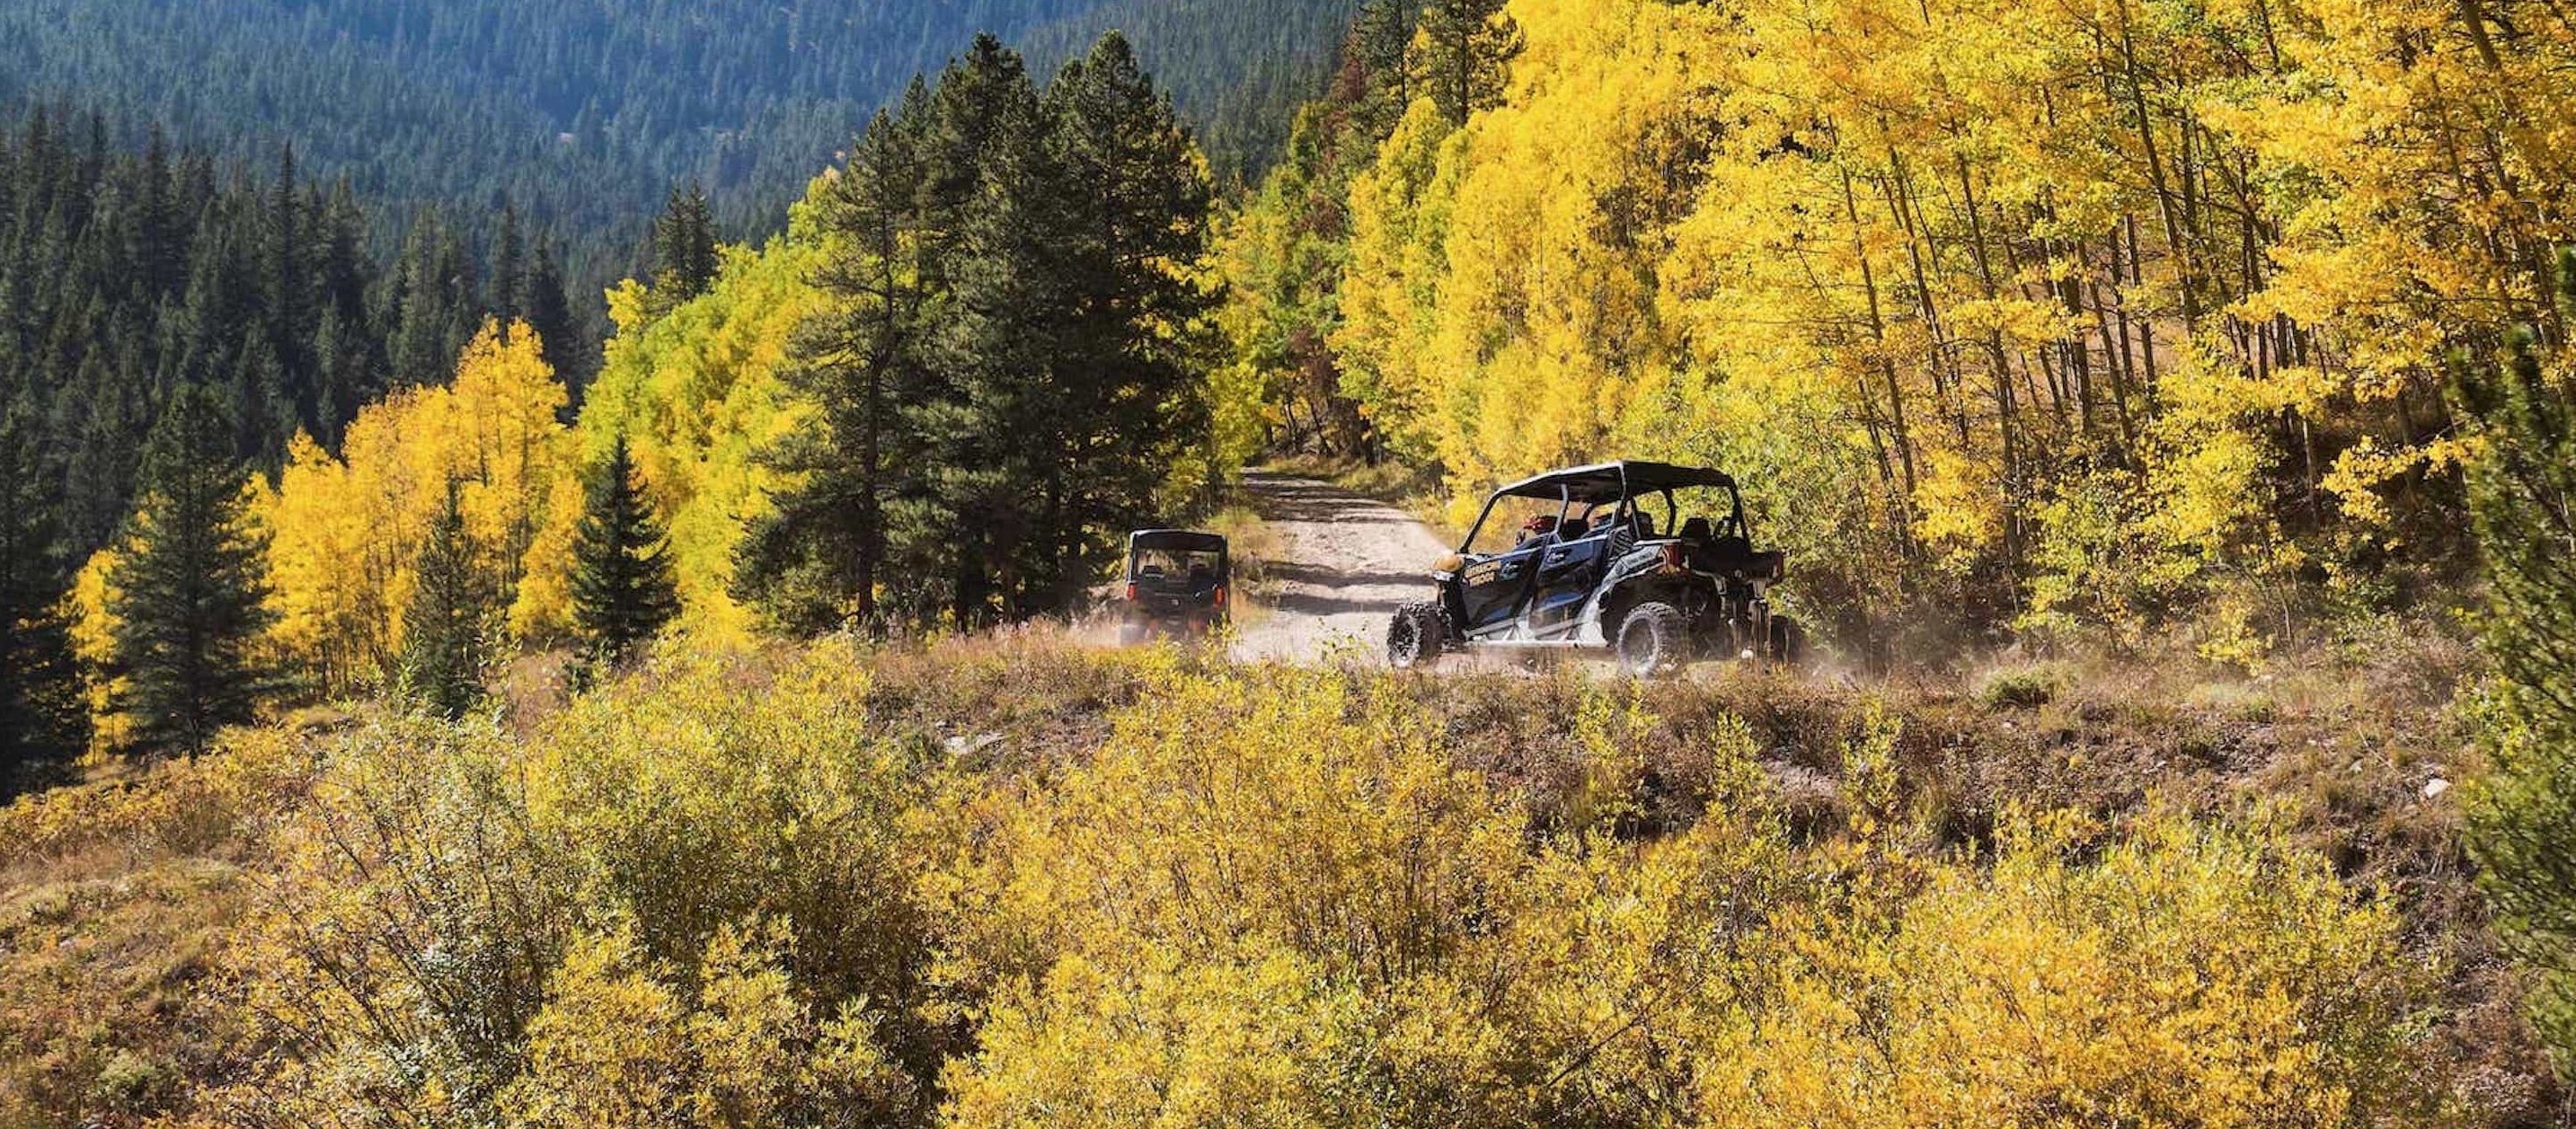 Two Can-am Maverick riding in a mountain trail in Colorado